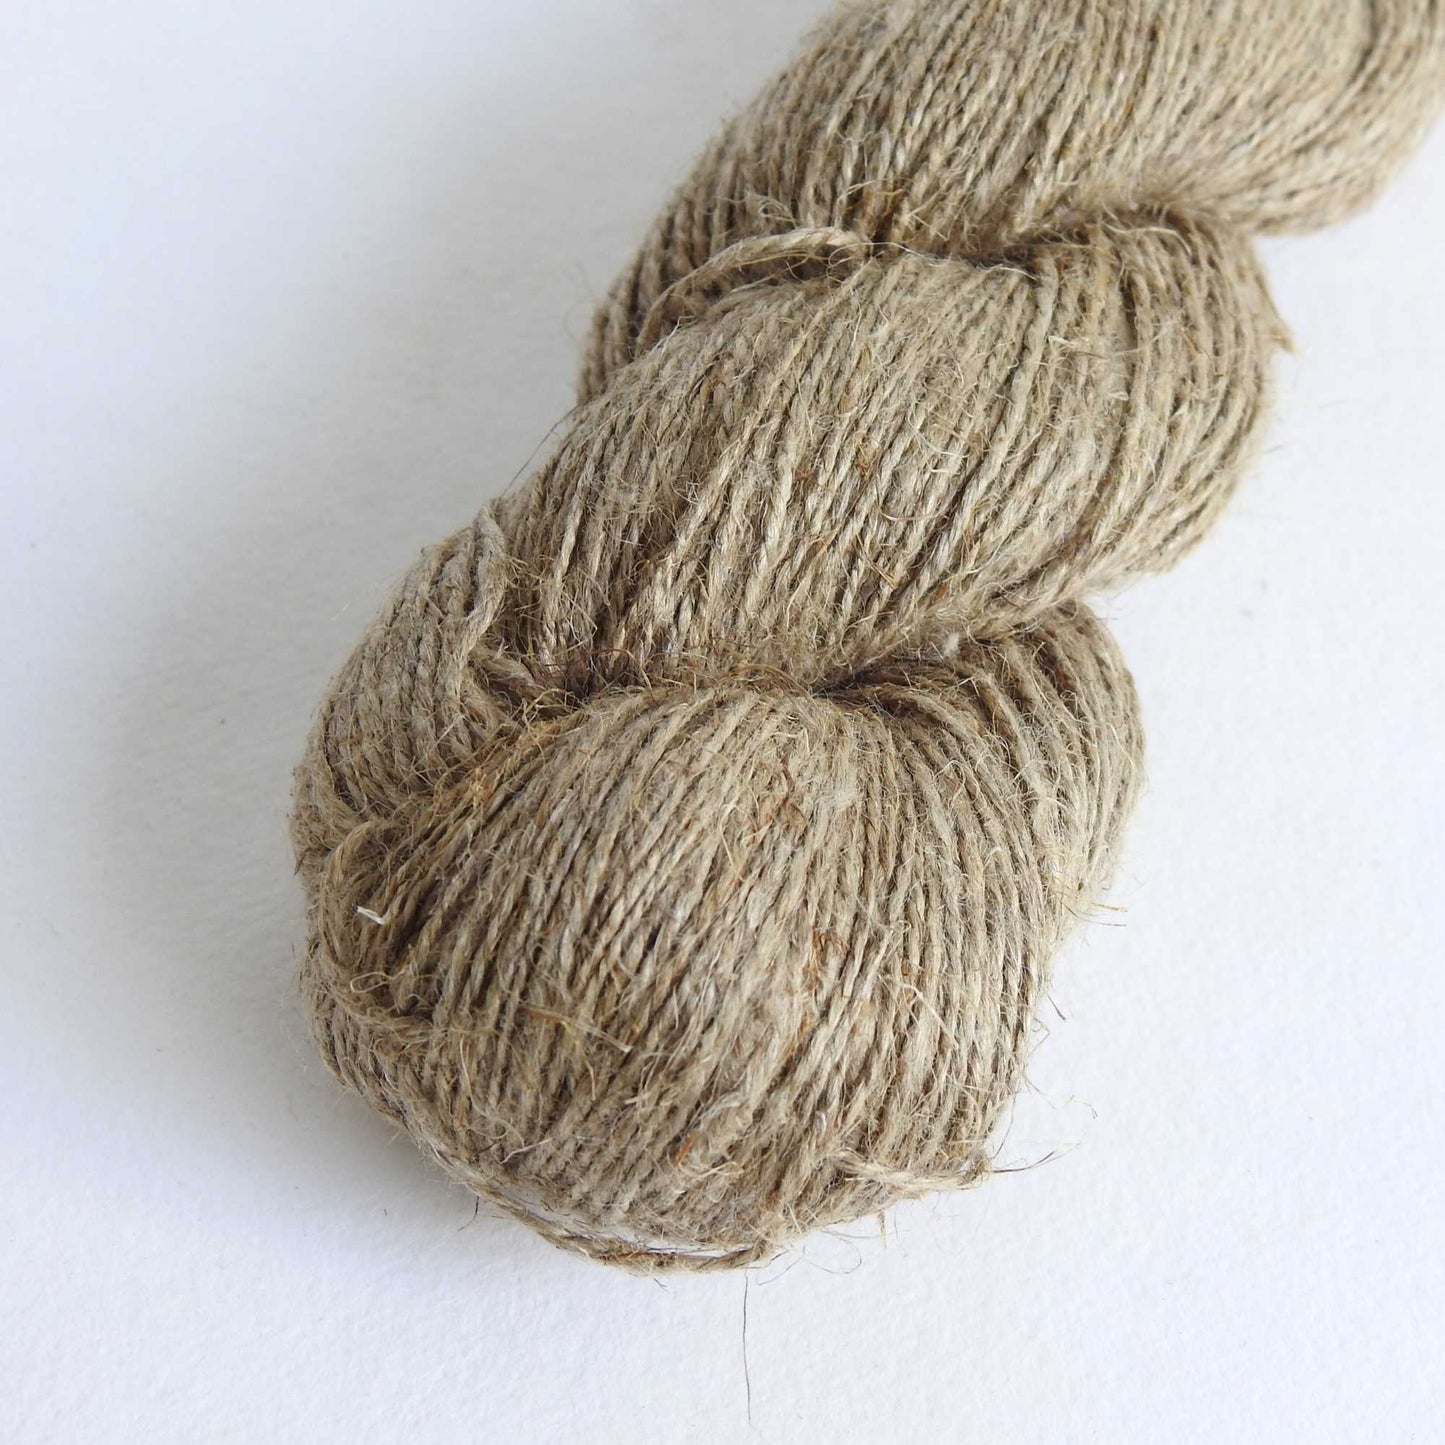 skein of unbleached natural linen yarn for weaving, knitting, crochet. sustainable eco friendly